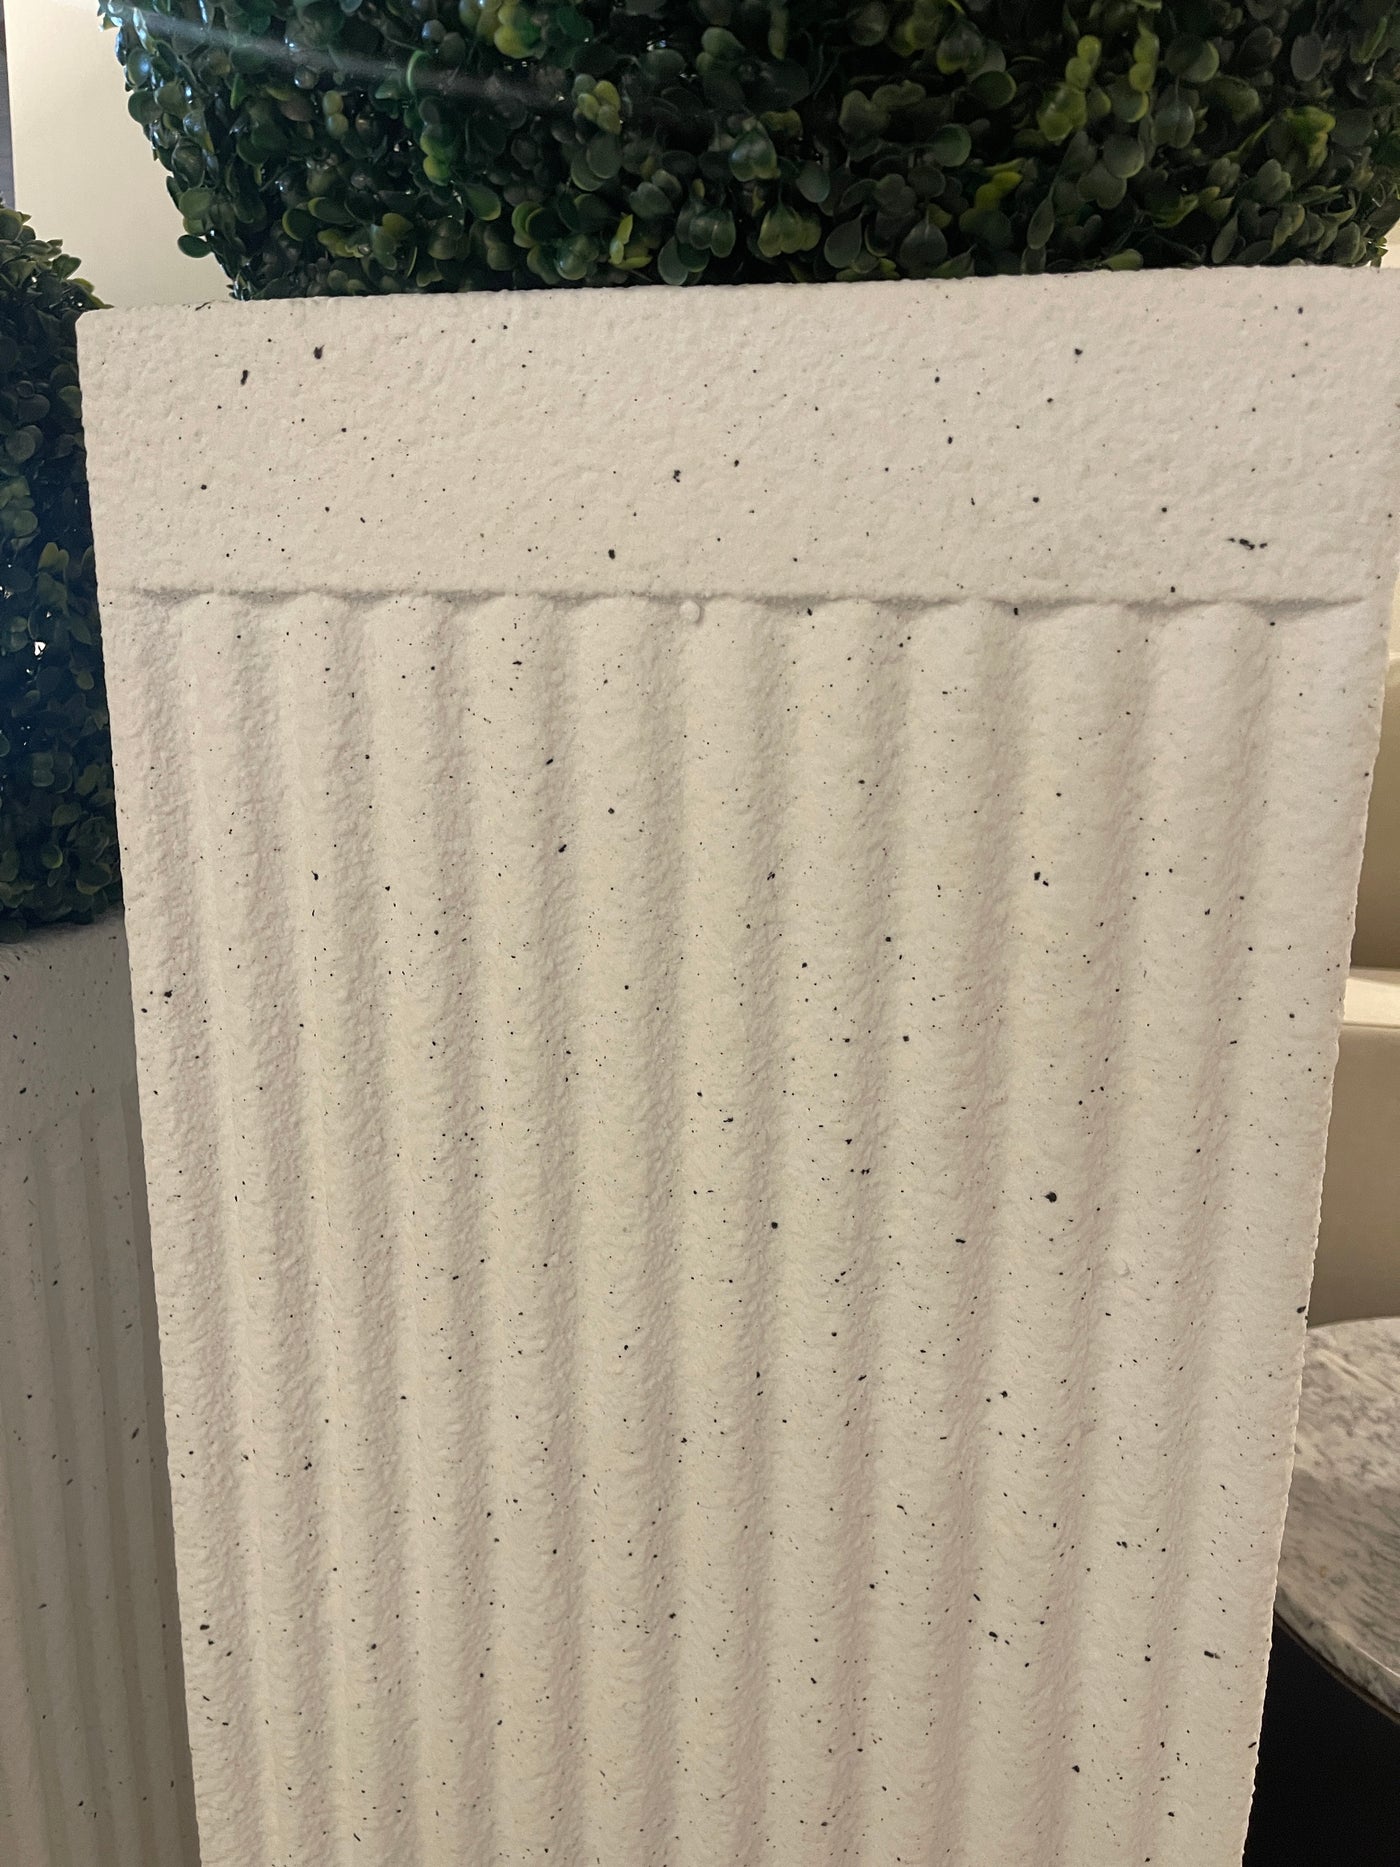 Textured Planter with stripes